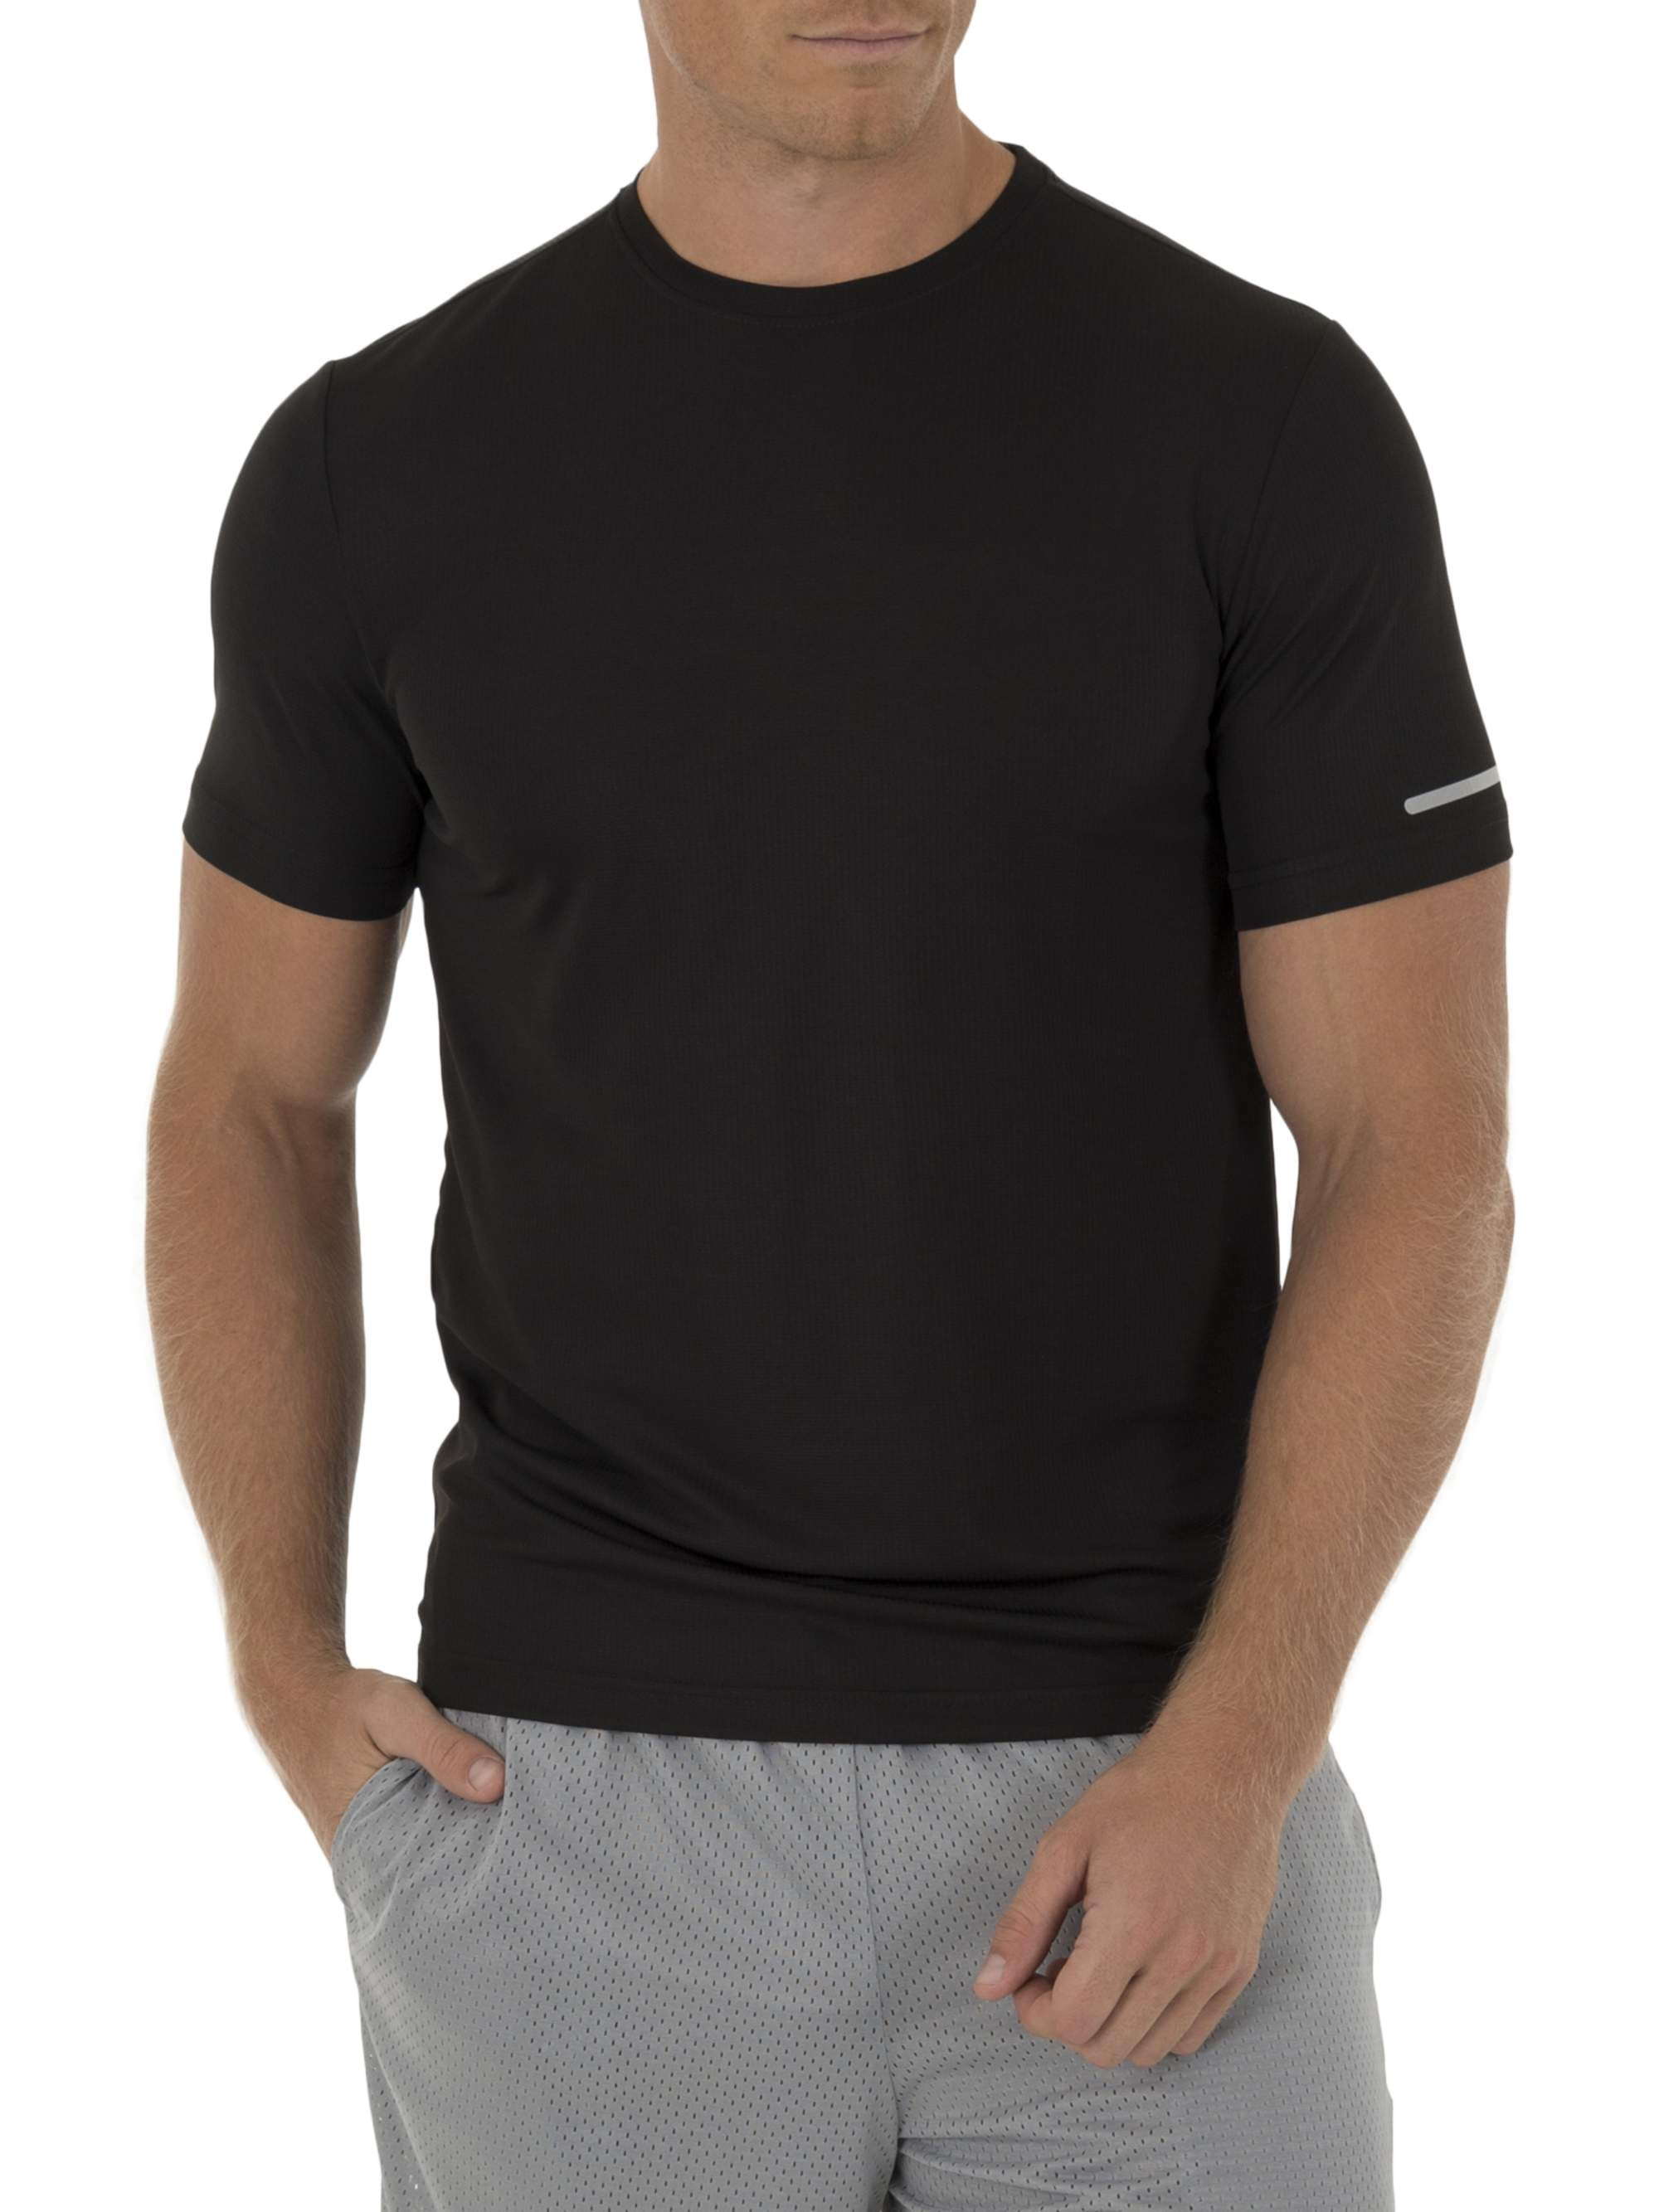 athletic works driworks shirts